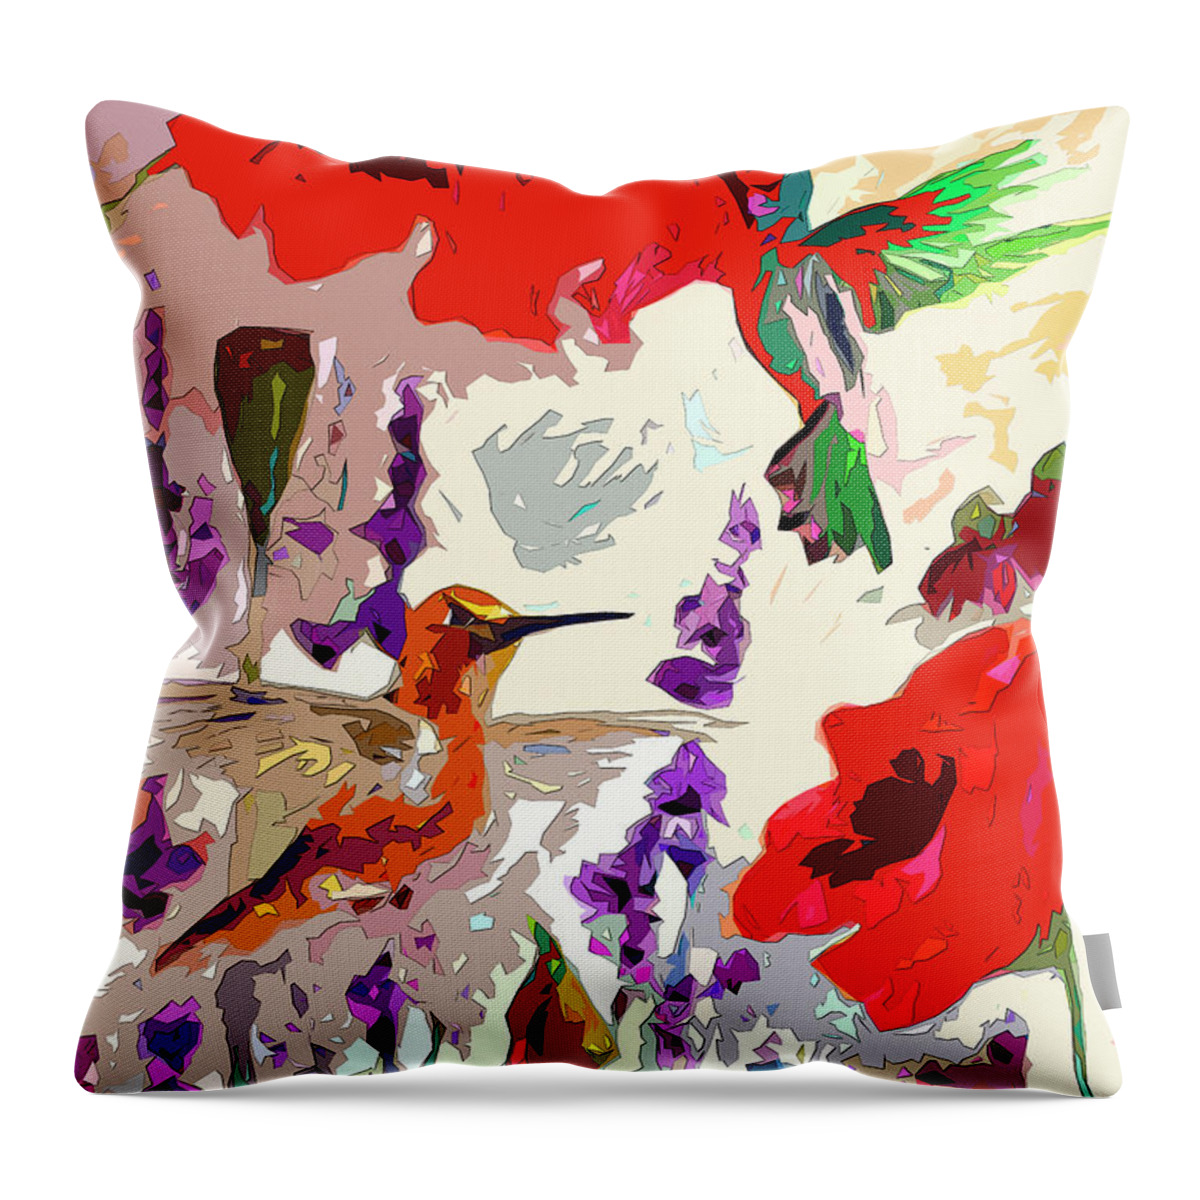 Hummingbirds Throw Pillow featuring the mixed media Modern Abstract Hummingbirds and Poppies by Ginette Callaway